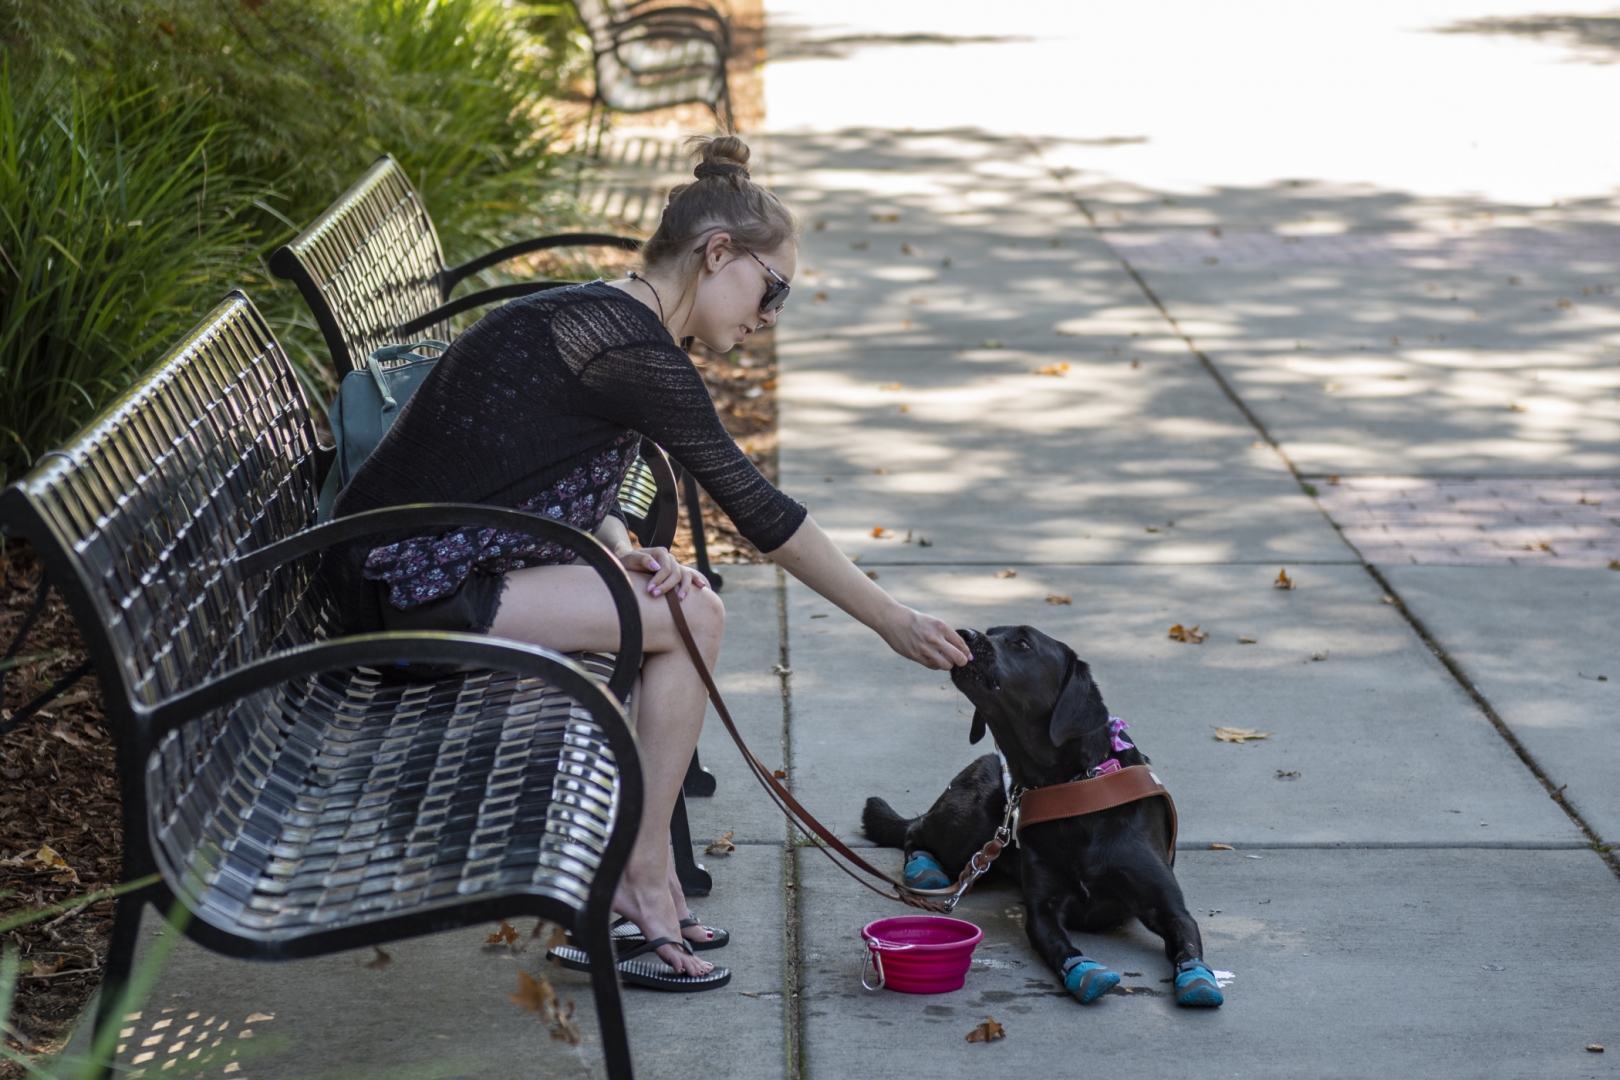 Olivia holds out a treat to Tartan while they rest in the shade near a campus bench with a bowl of water.